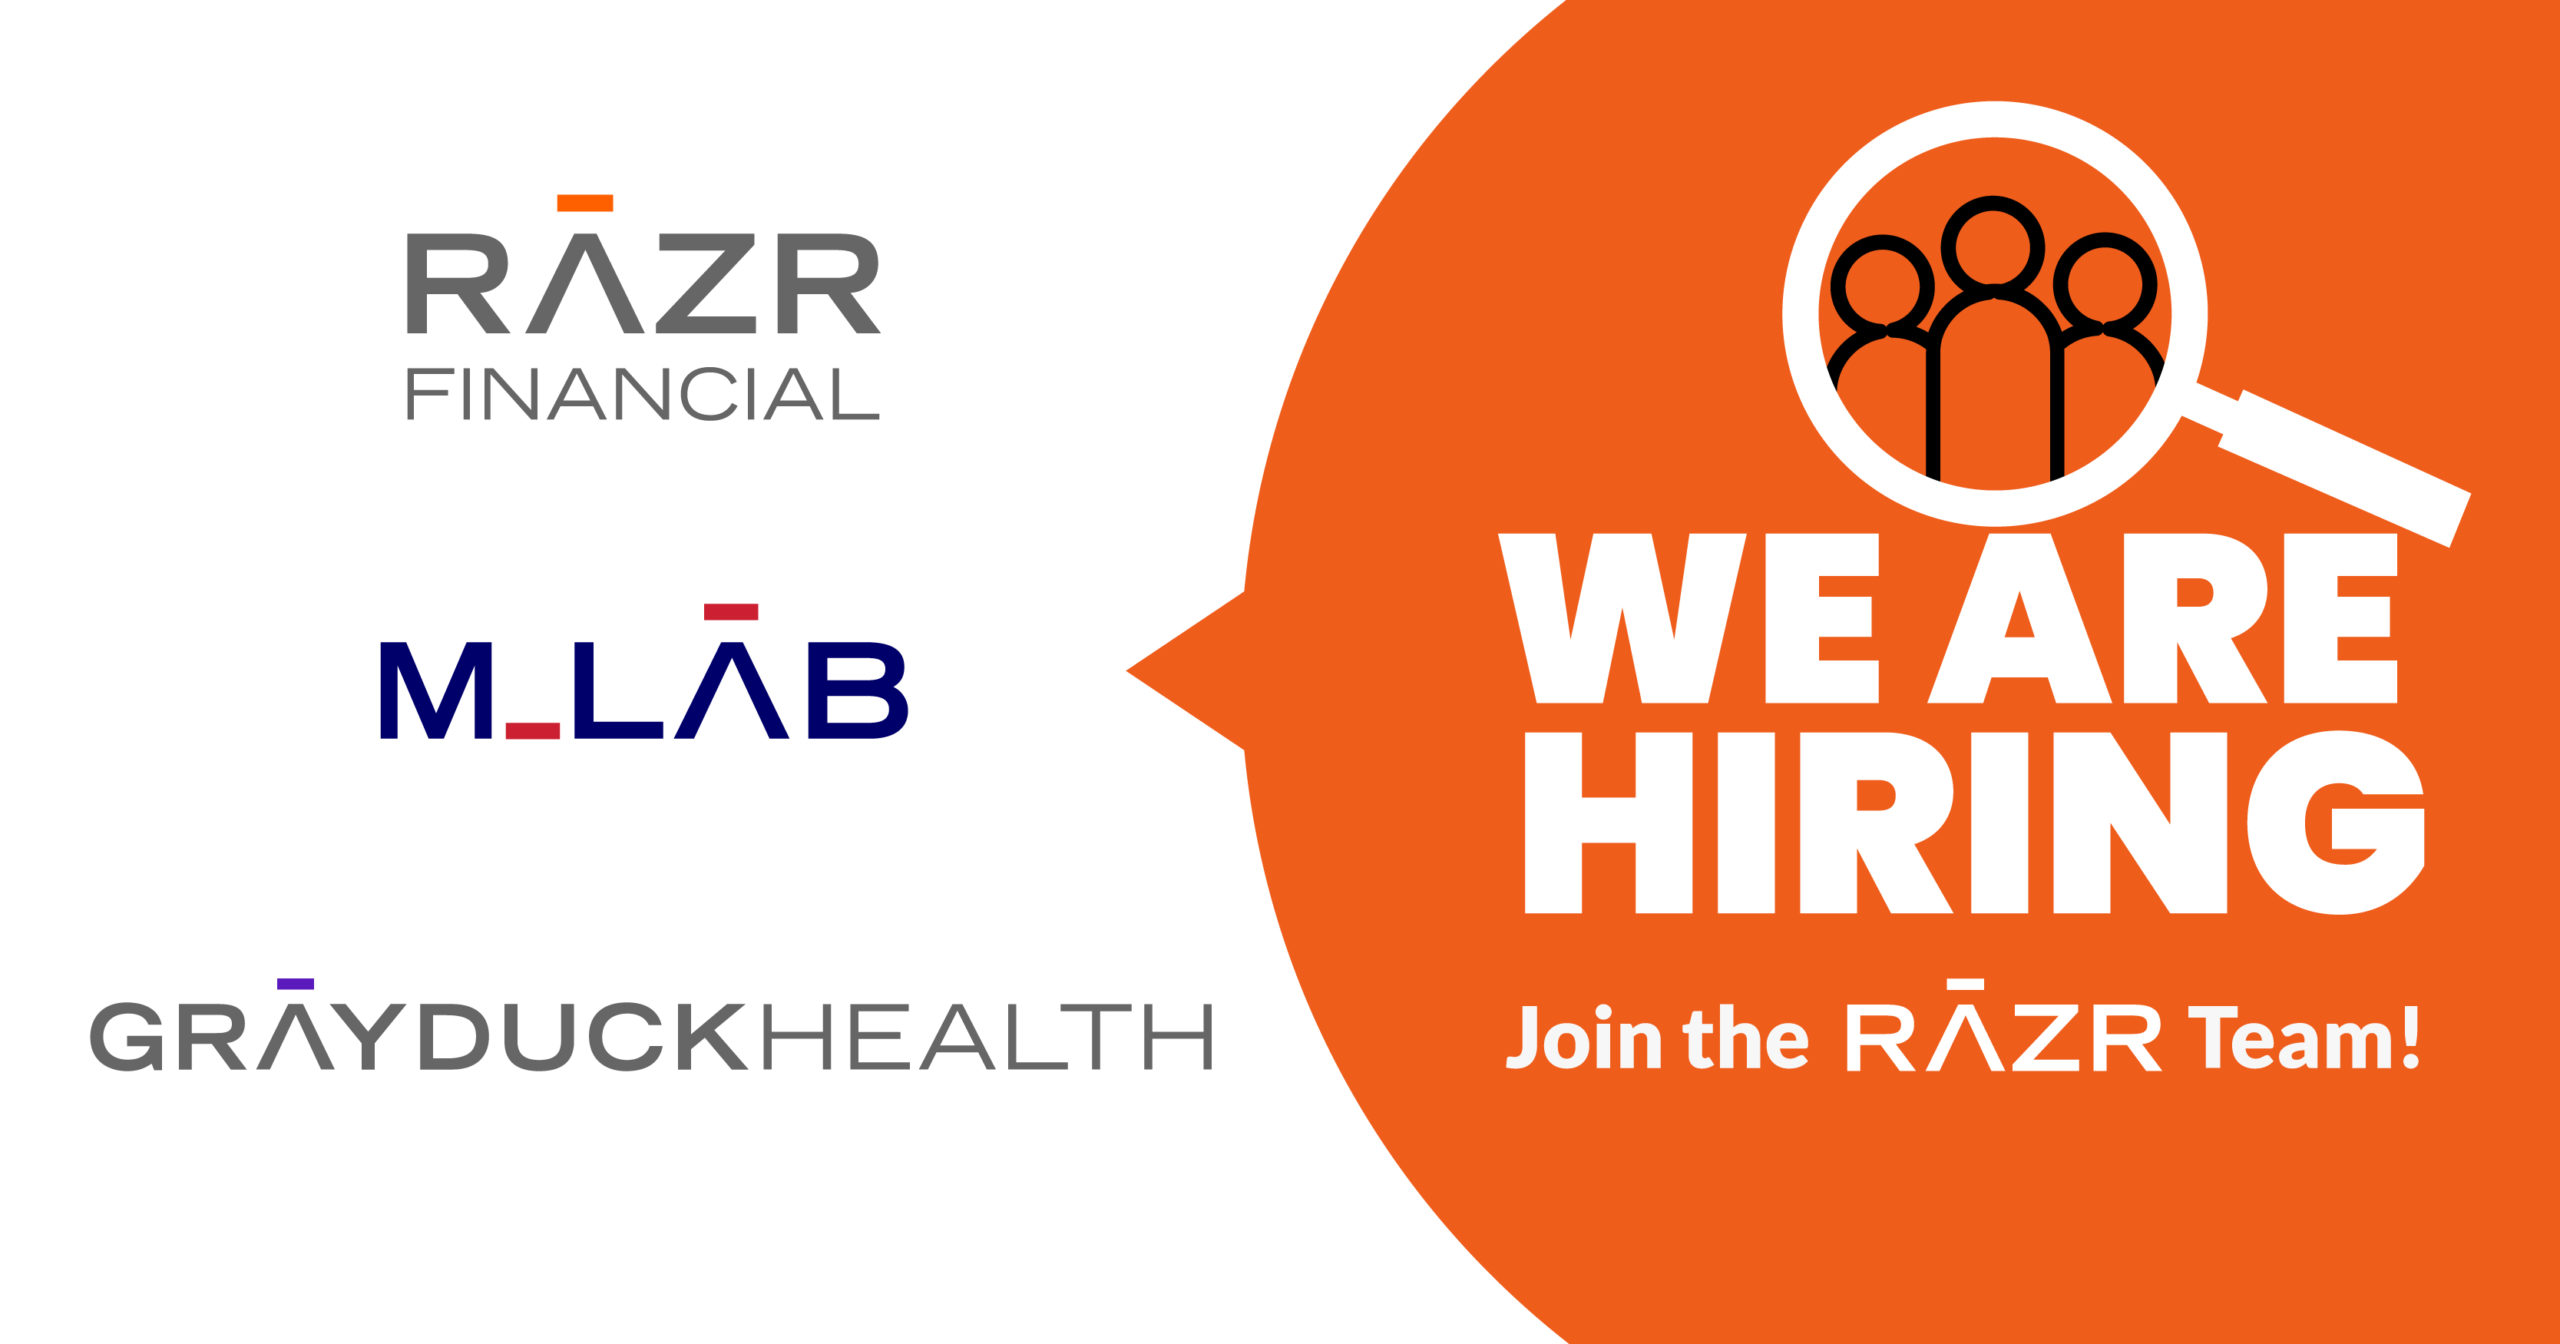 Careers at RAZR — A job at RAZR is like no other.